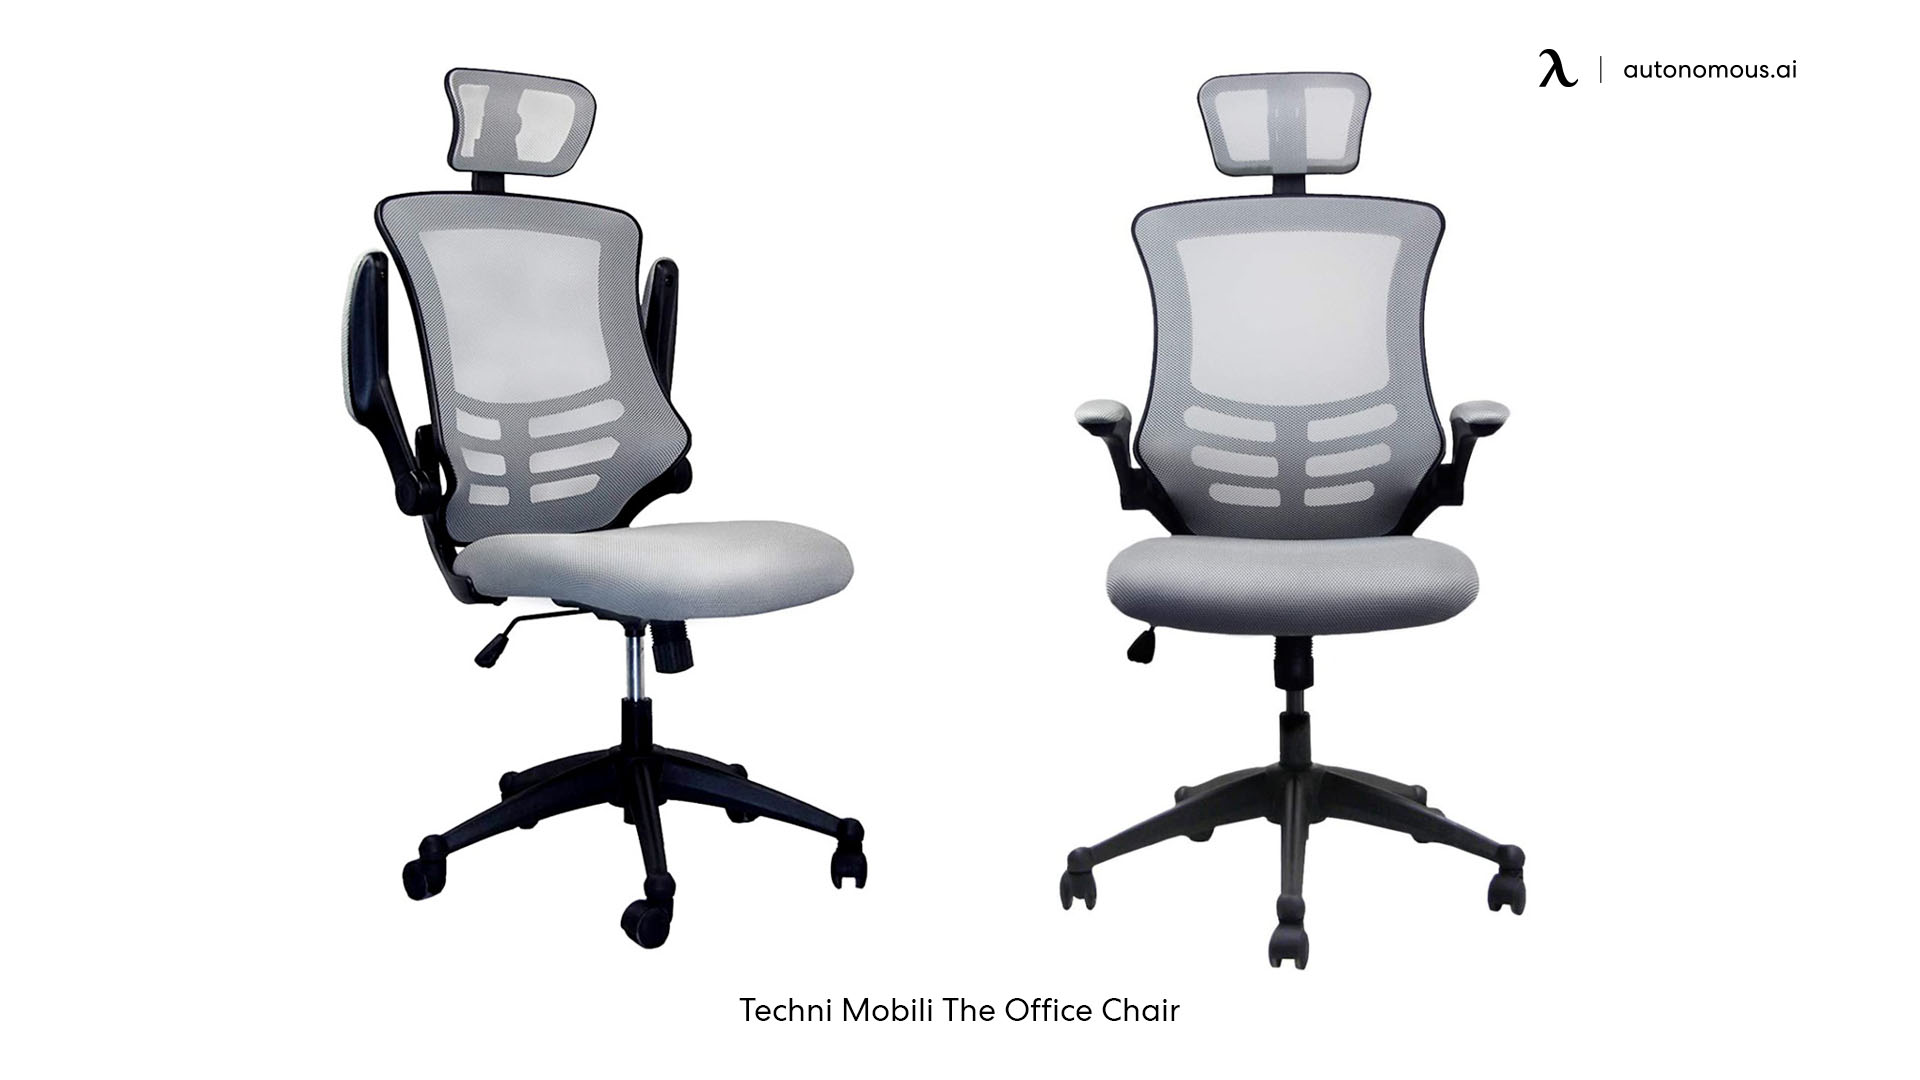 Techni Mobili affordable office chairs